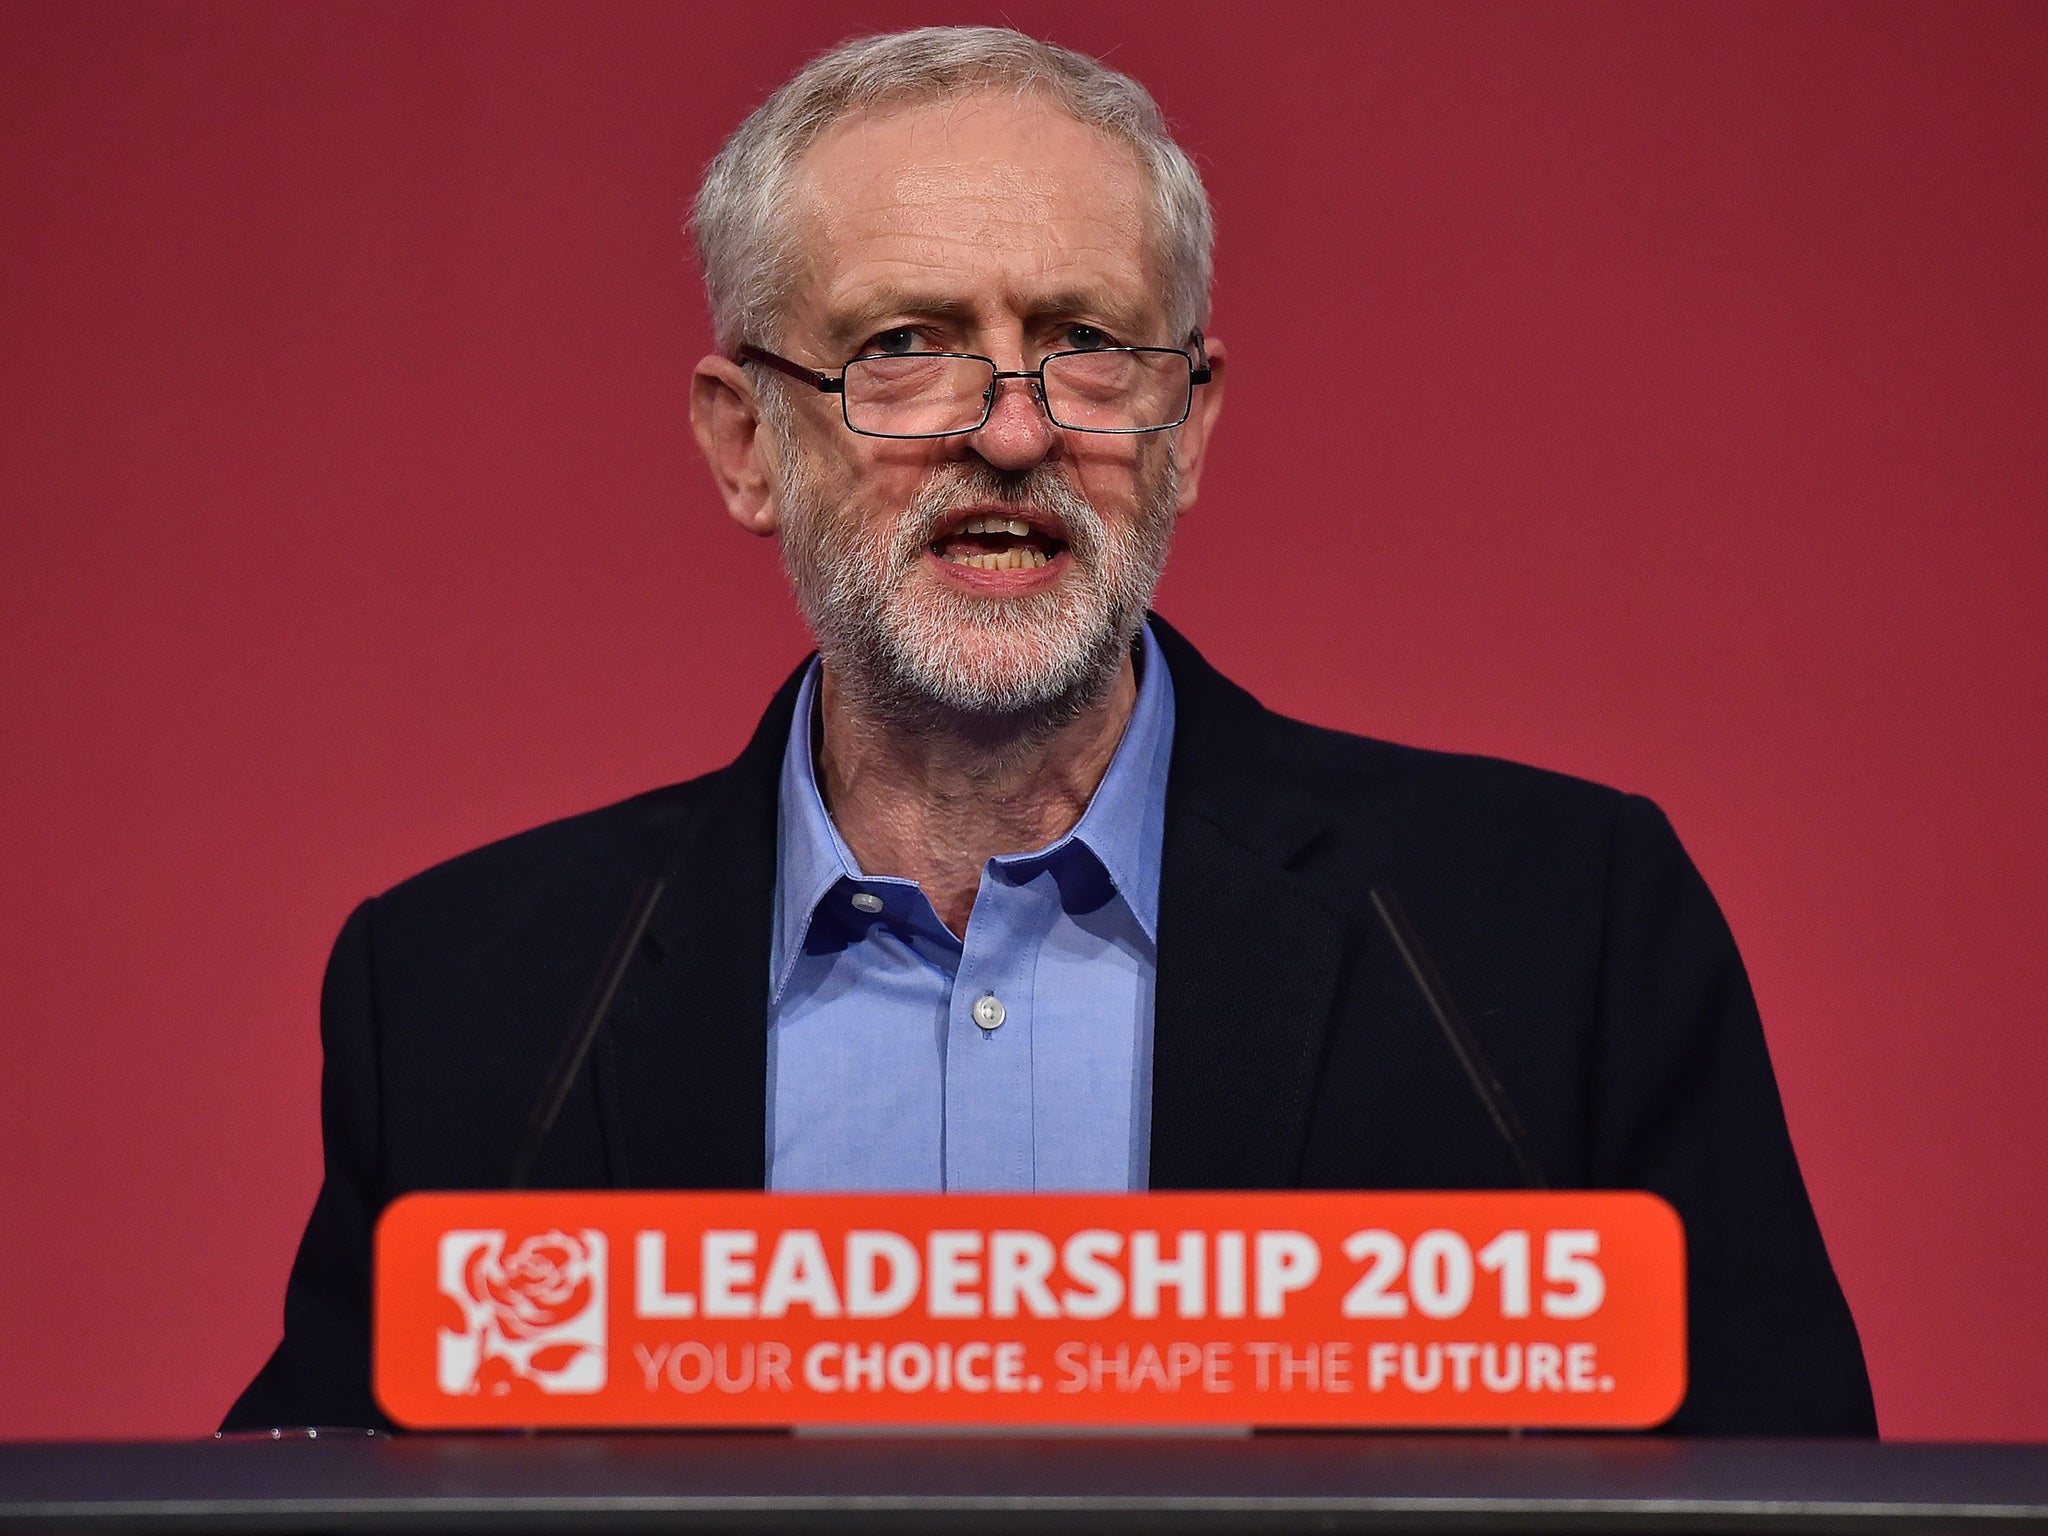 Corbyn addresses the audience after being announced as the new leader of the Labour party in London